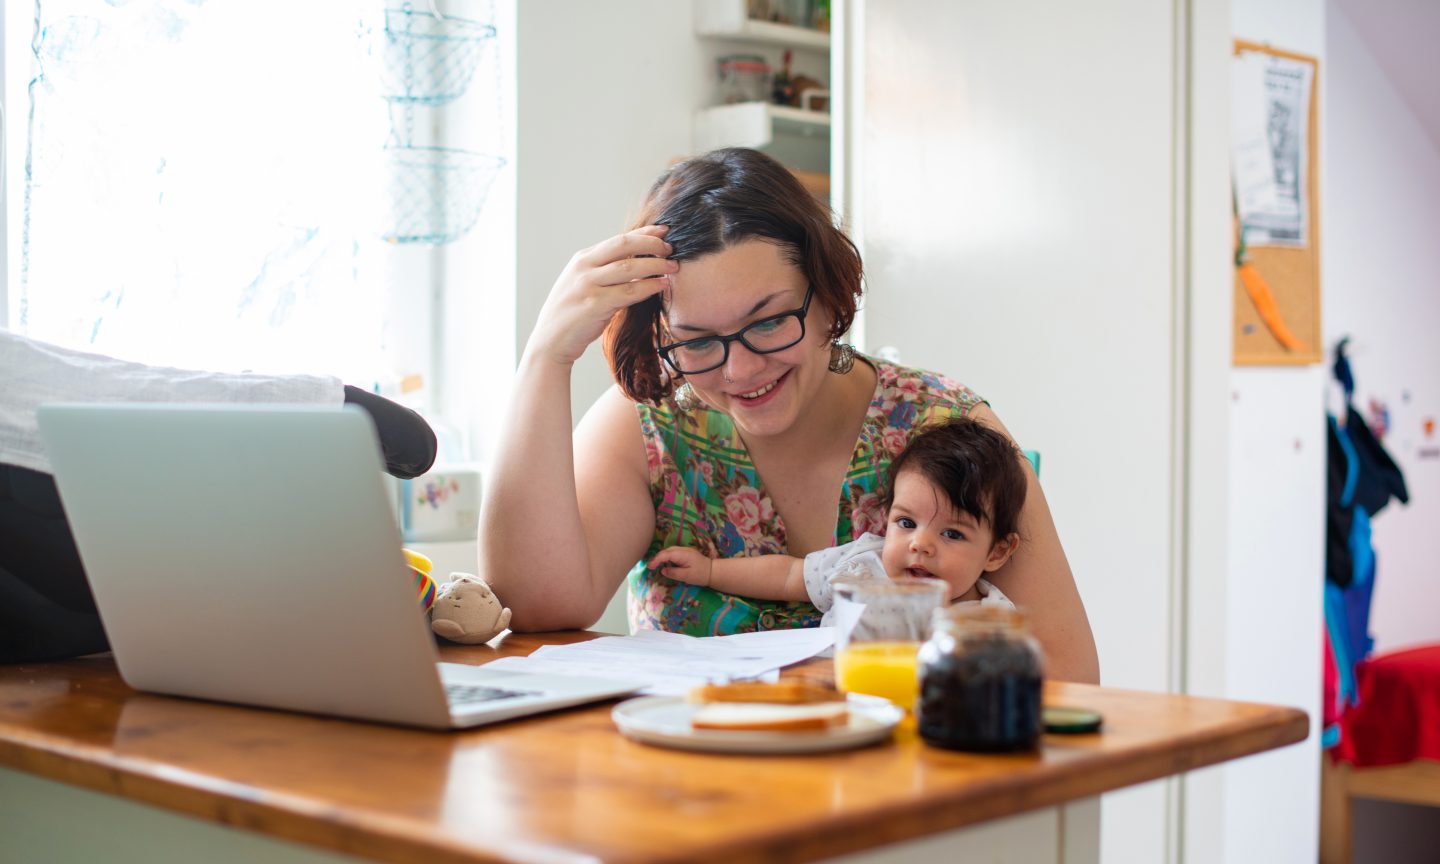 If Your Life Modified in 2021, Look ahead to Earnings Tax Surprises – NerdWallet